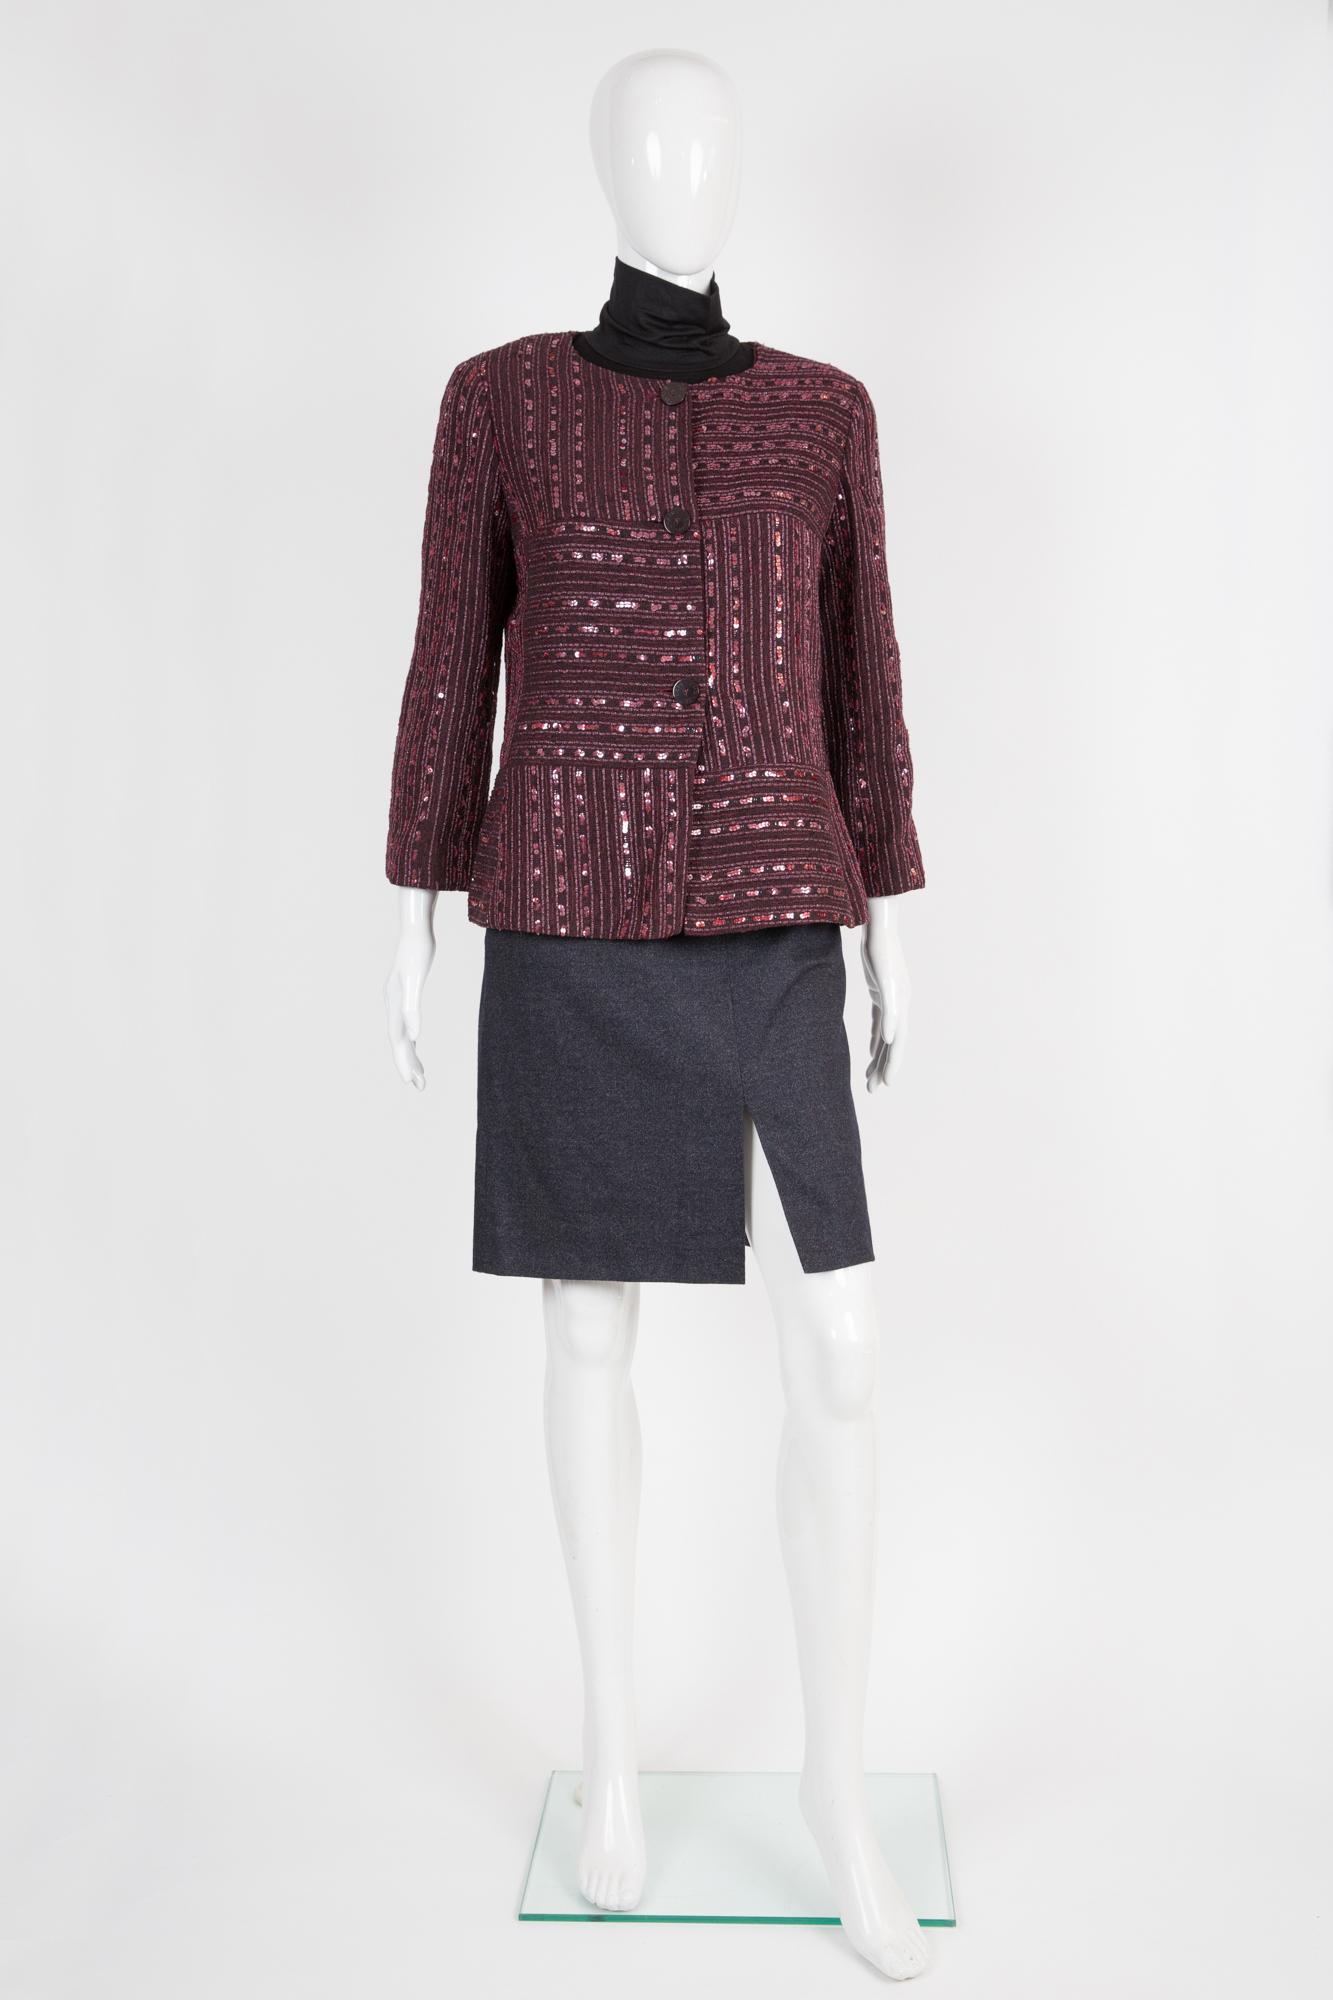 Croisiere 2000s Chanel bordeaux evening sequences tweed jacket featuring a collarless design, a sequin embellishment, a front logo button fastening, cropped long sleeves, a logo silk lining. 
Circa 2000s. 
Label size 42fr/US10/UK14
In excellent